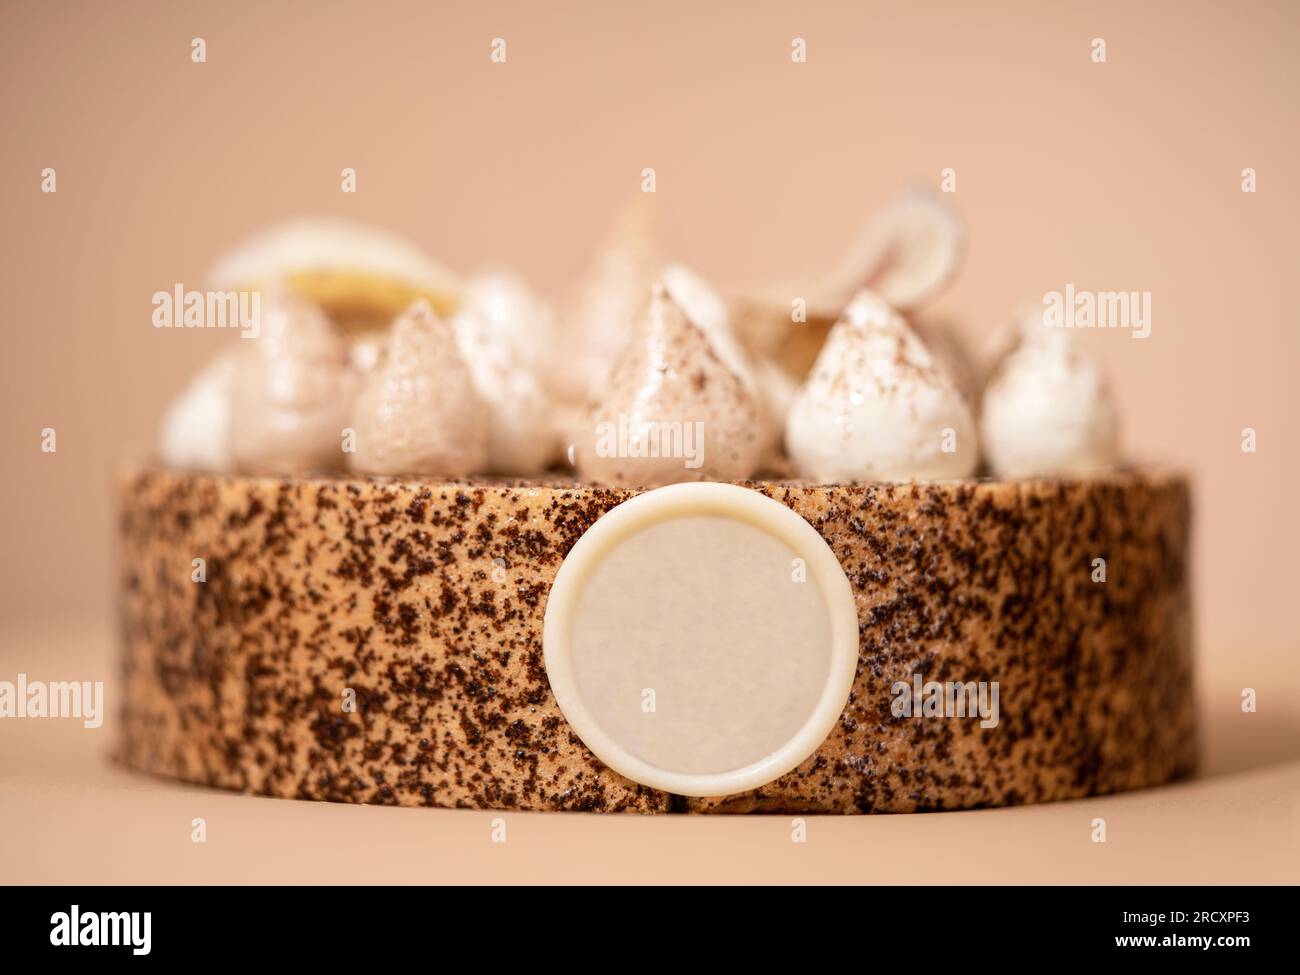 A delicious-looking dessert of a round cake on a brown plate, topped with a generous helping of fluffy white whipped cream Stock Photo